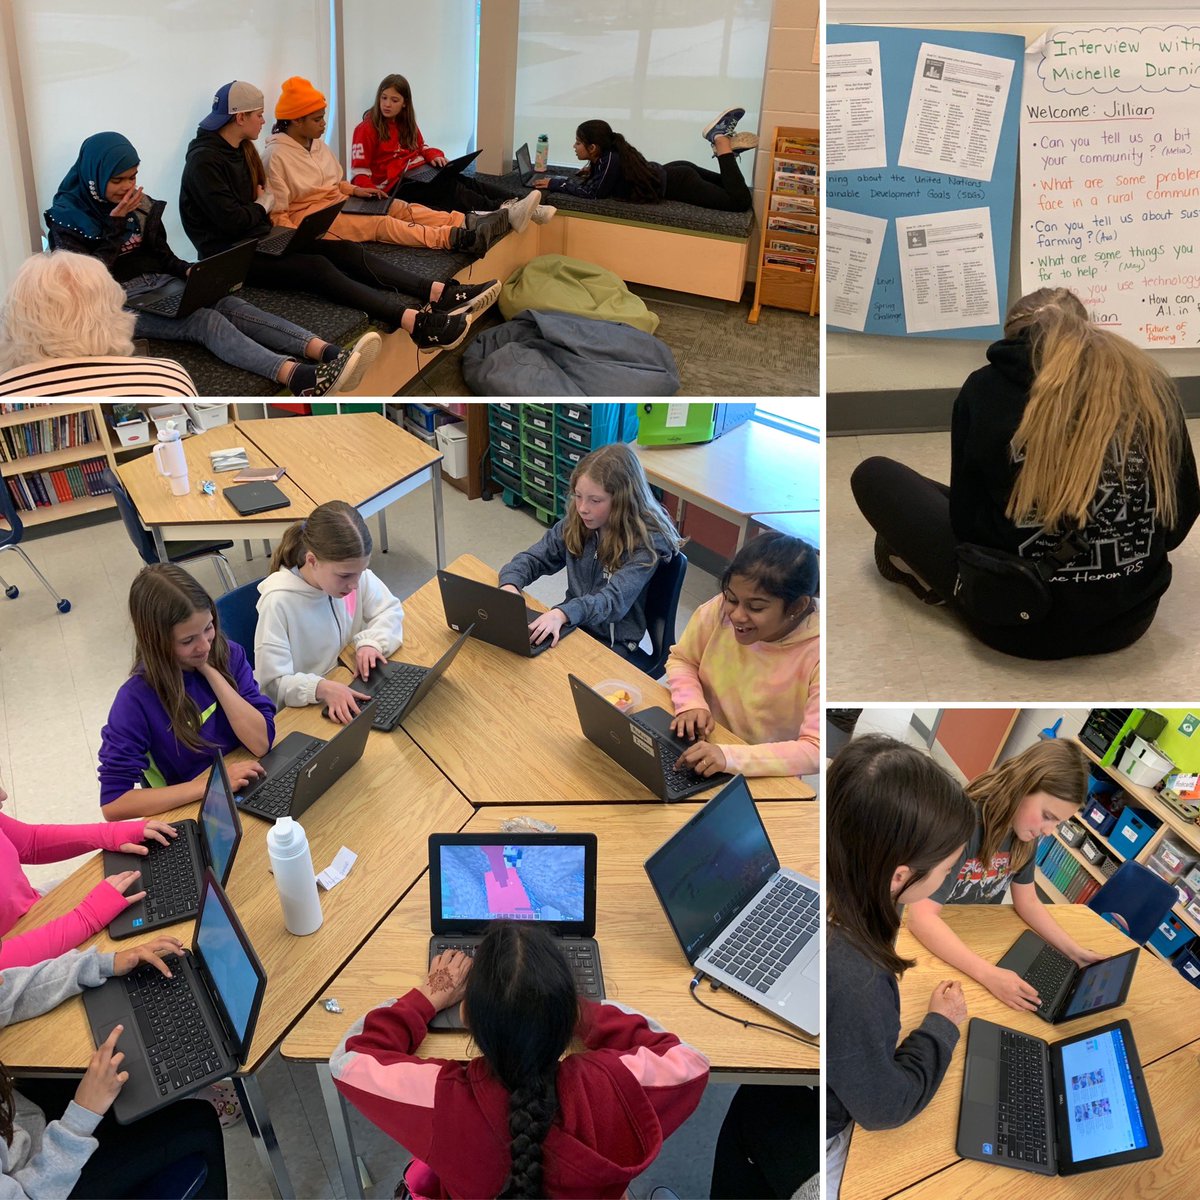 Our level 1 GWG team is working on our build for the spring challenge. The level 2s are working on leadership reflection posts, and the level 3s are practising ESports with the amazing @brendasherry #girlswhogame @delltech @KatPapulkas